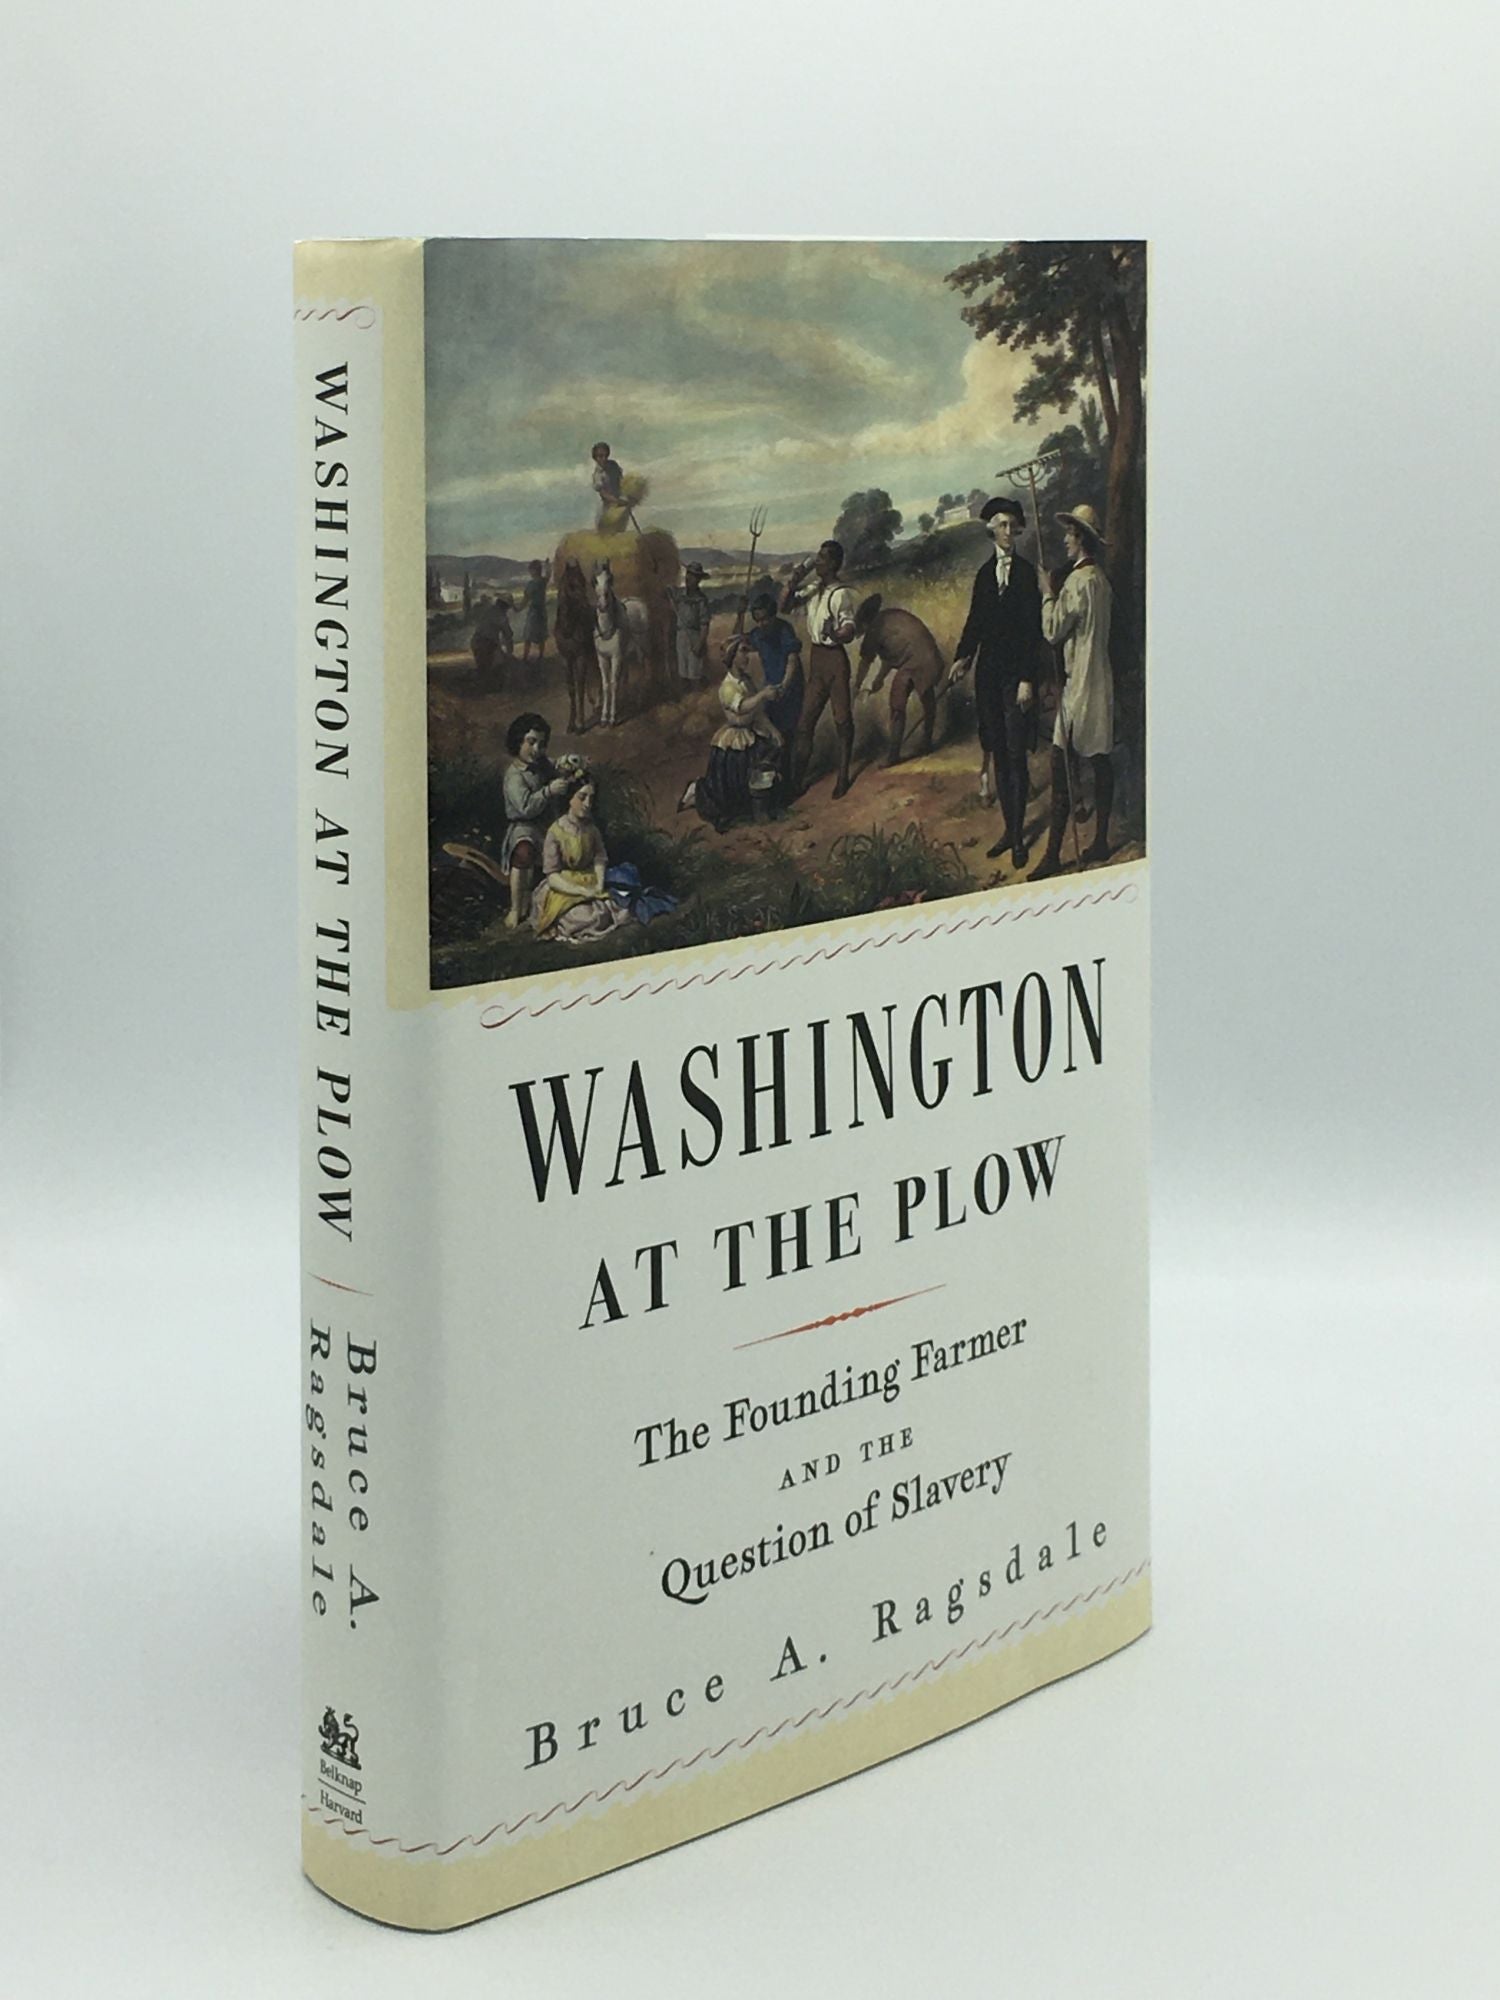 RAGSDALE Bruce A. - Washington at the Plow the Founding Fathers and the Question of Slavery